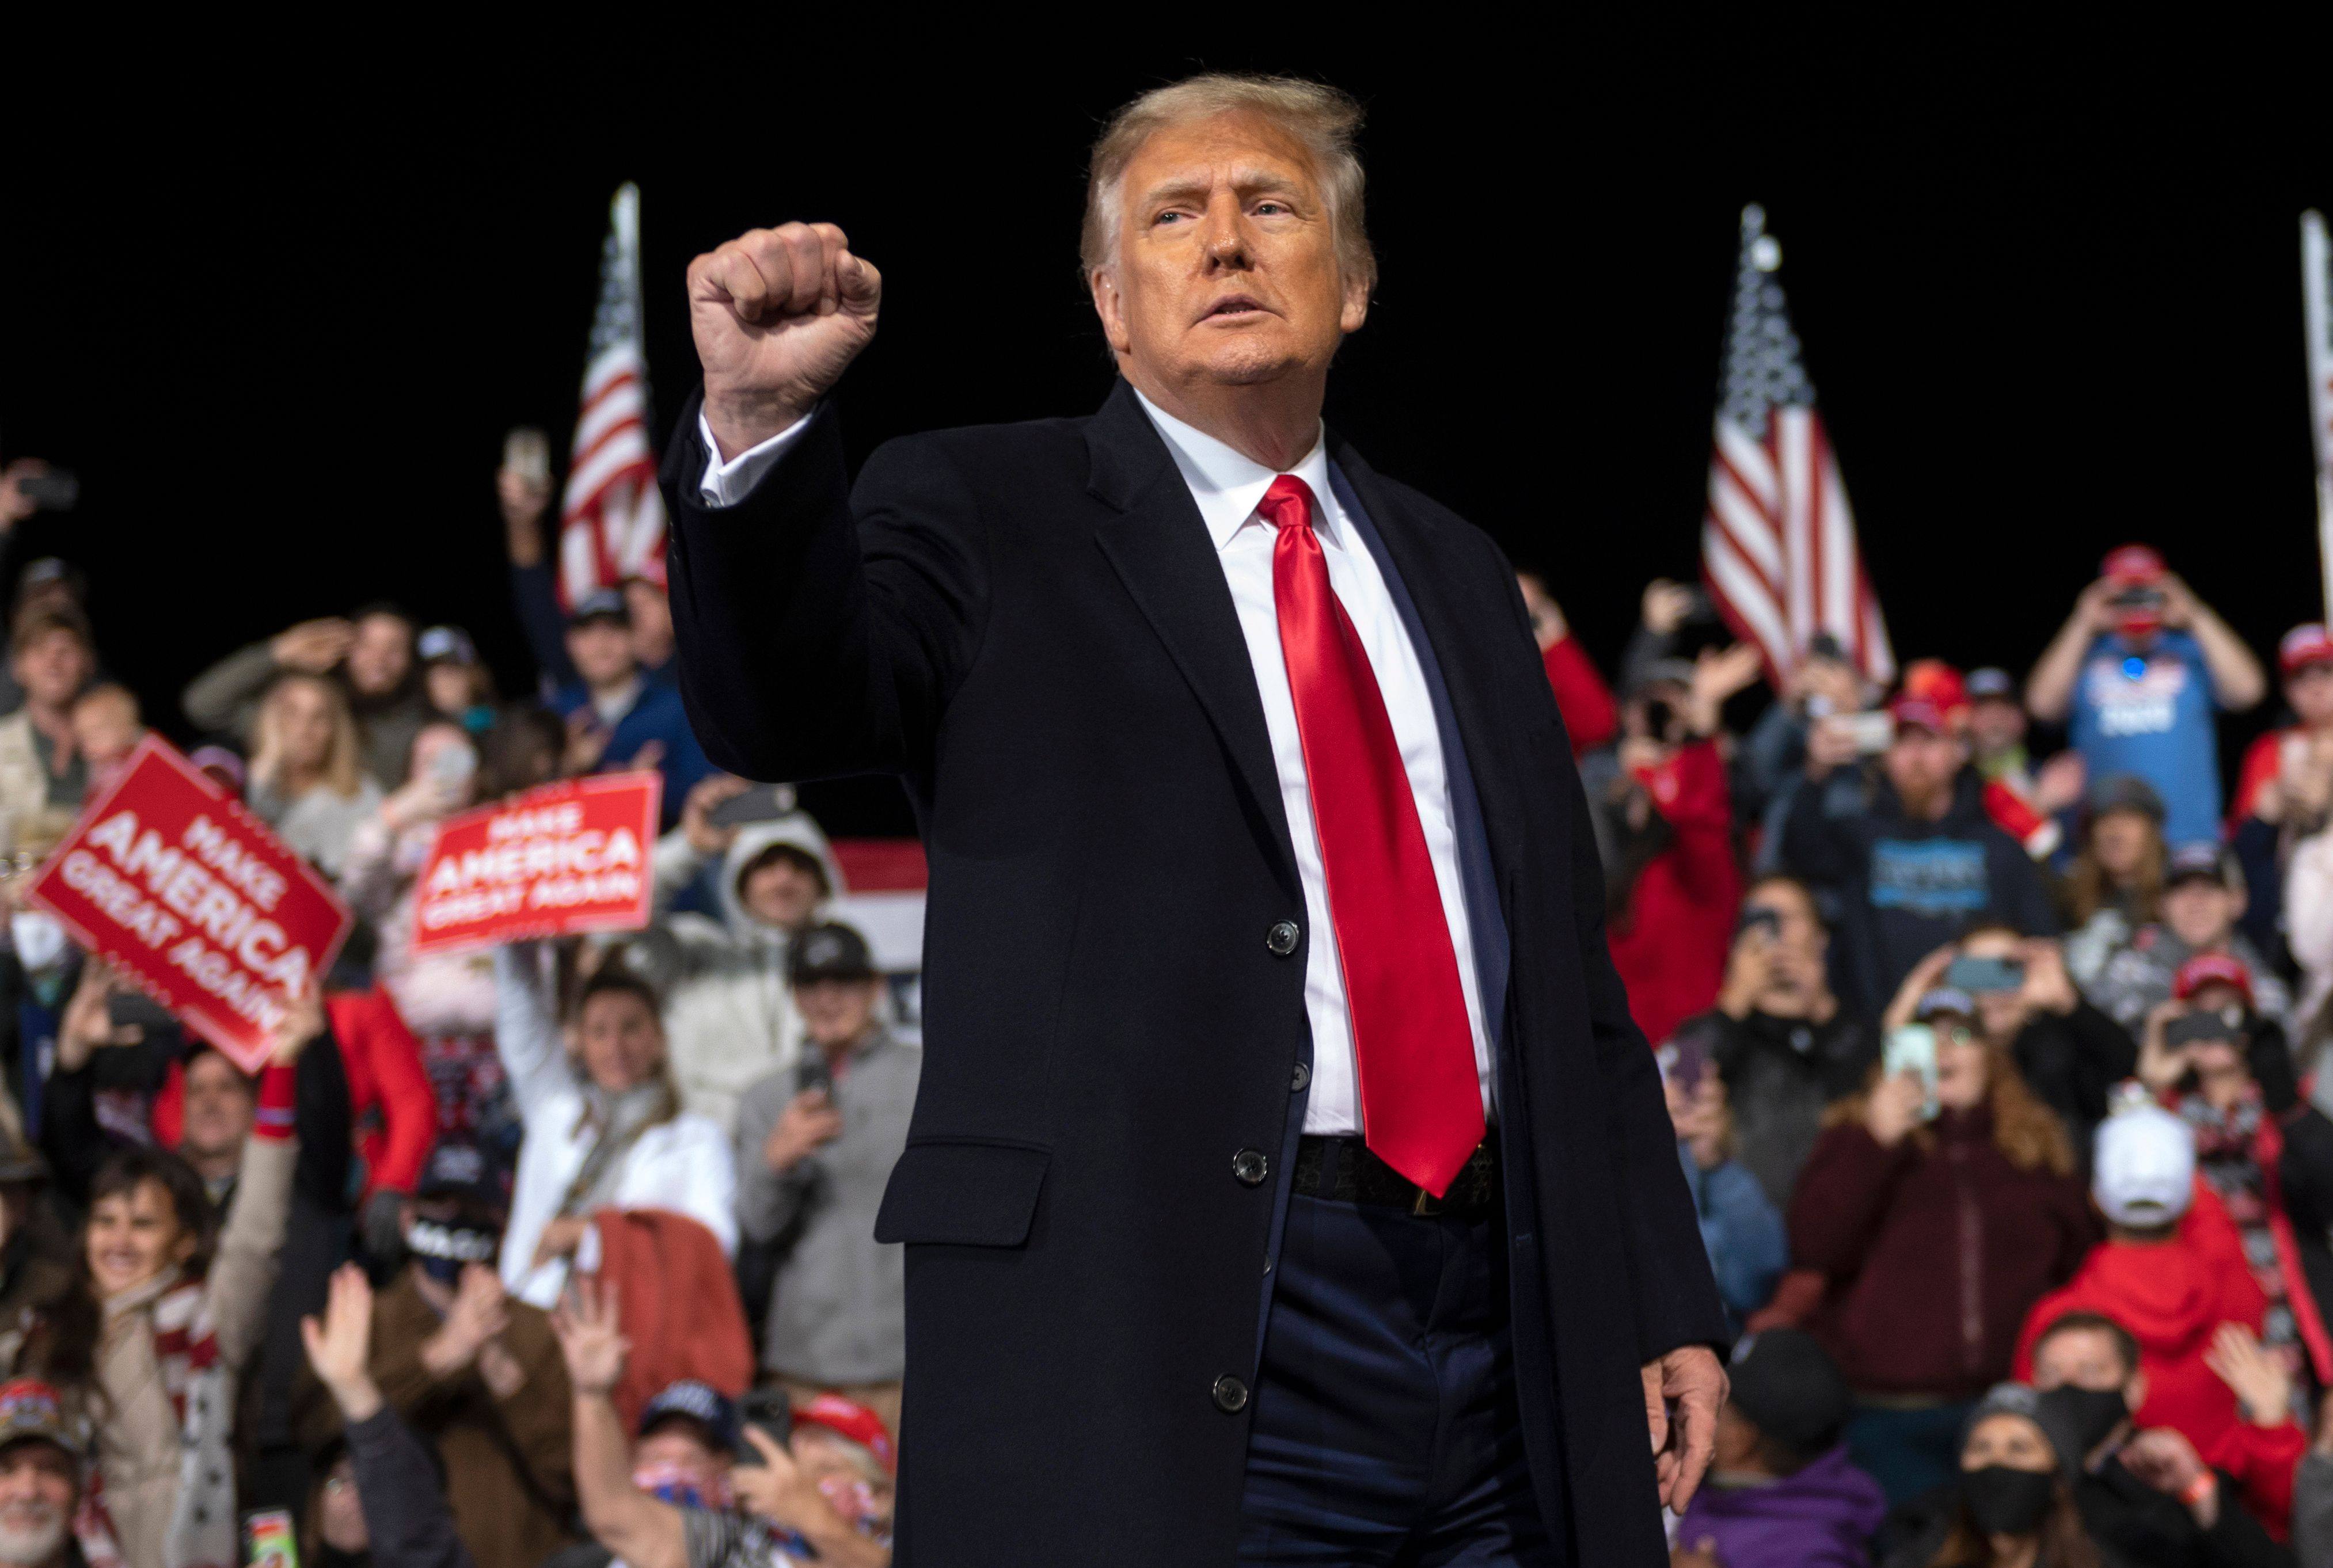 US President Donald Trump holds up his fist as he leaves the stage at the end of a rally in Valdosta, Georgia, in December 2020. Photo: AFP via TNS